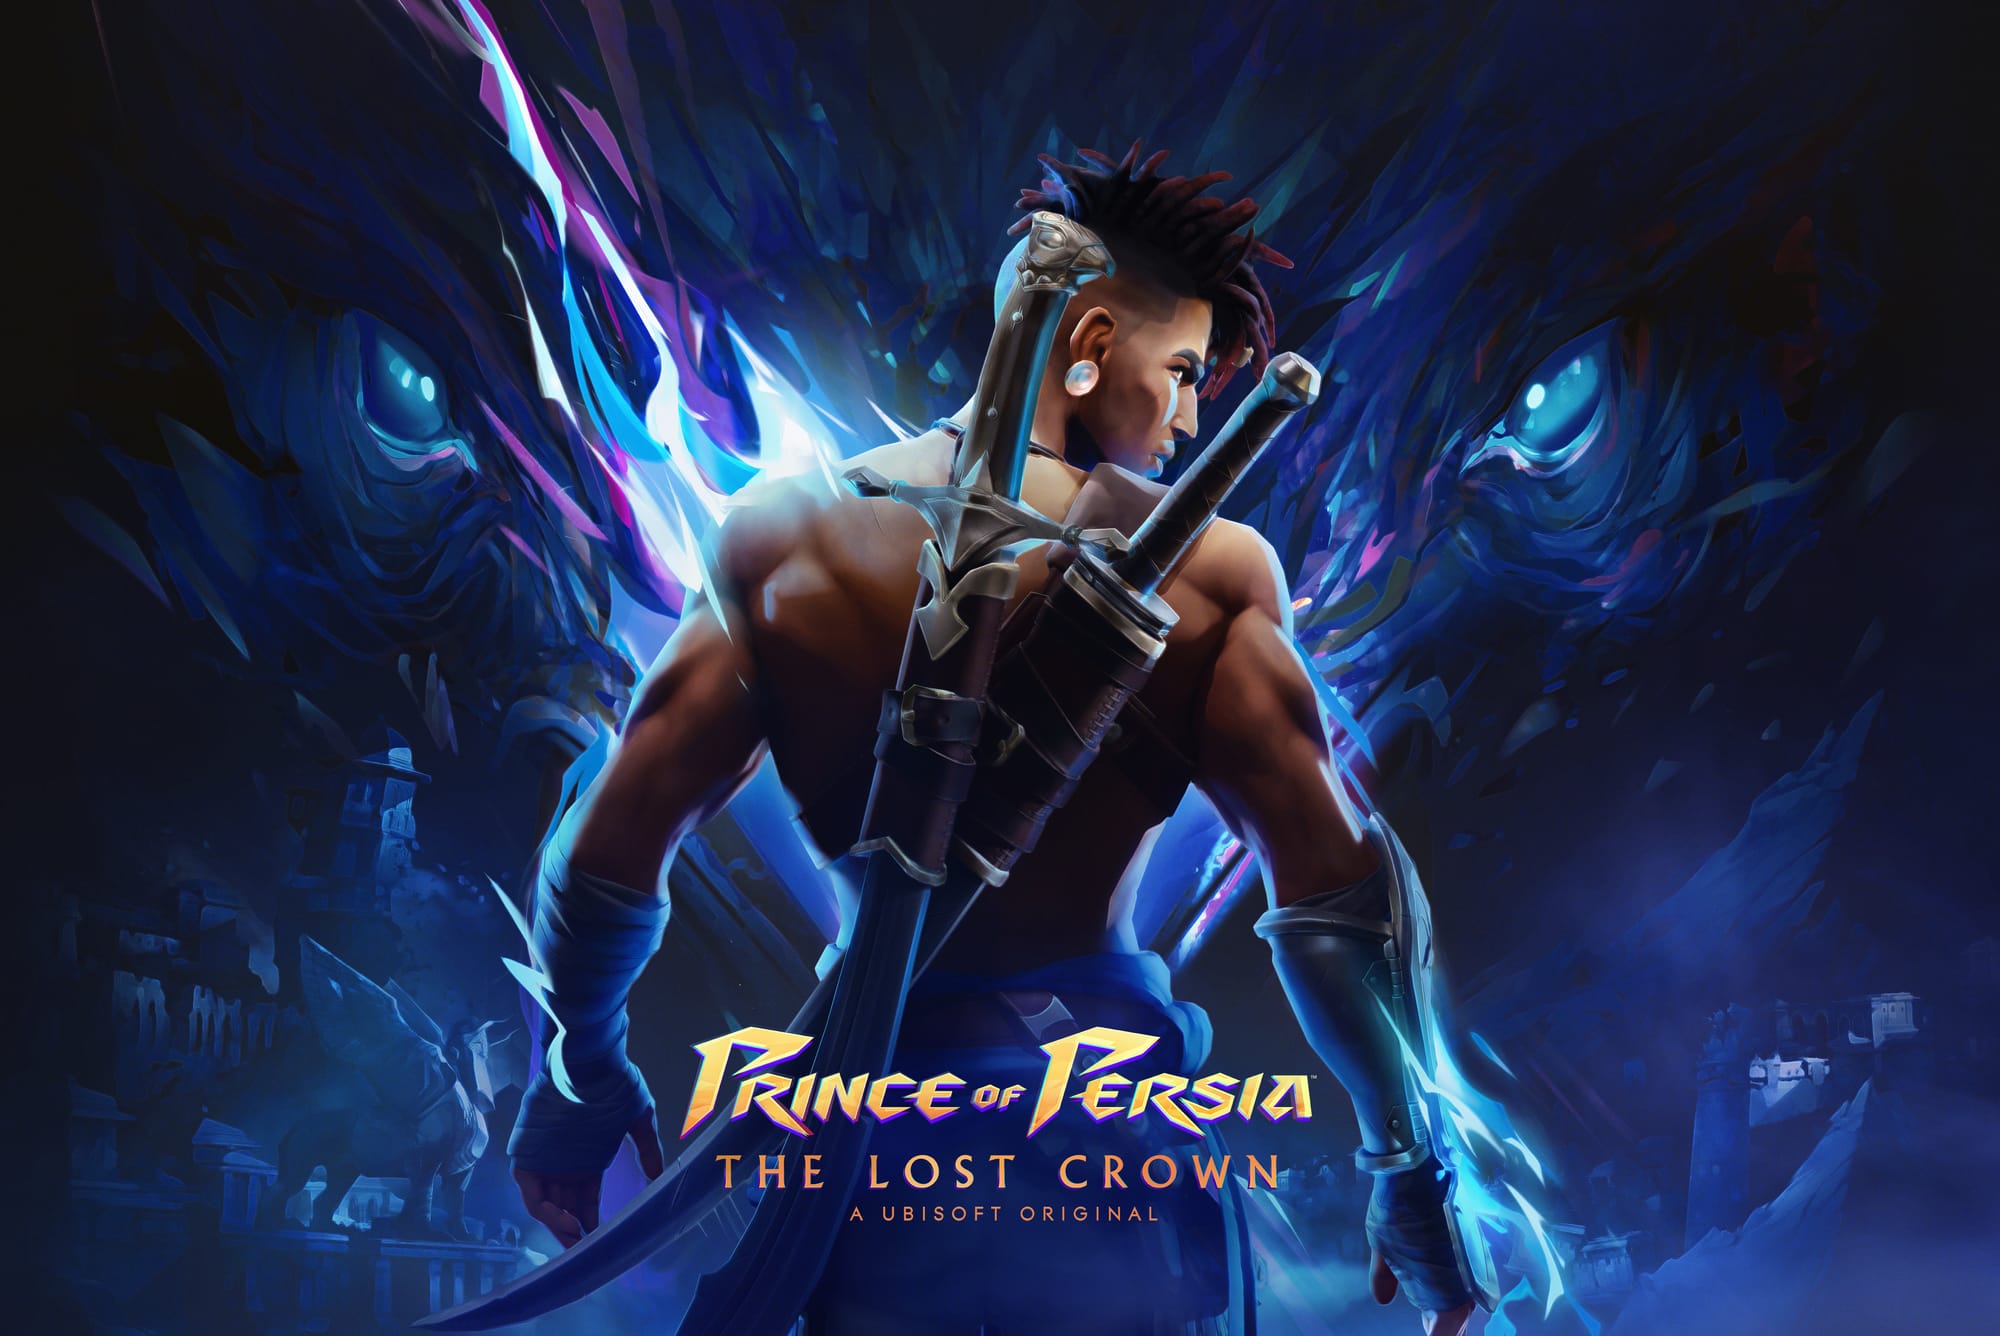 Prince of Persia: The Lost Crown Hands-on Preview